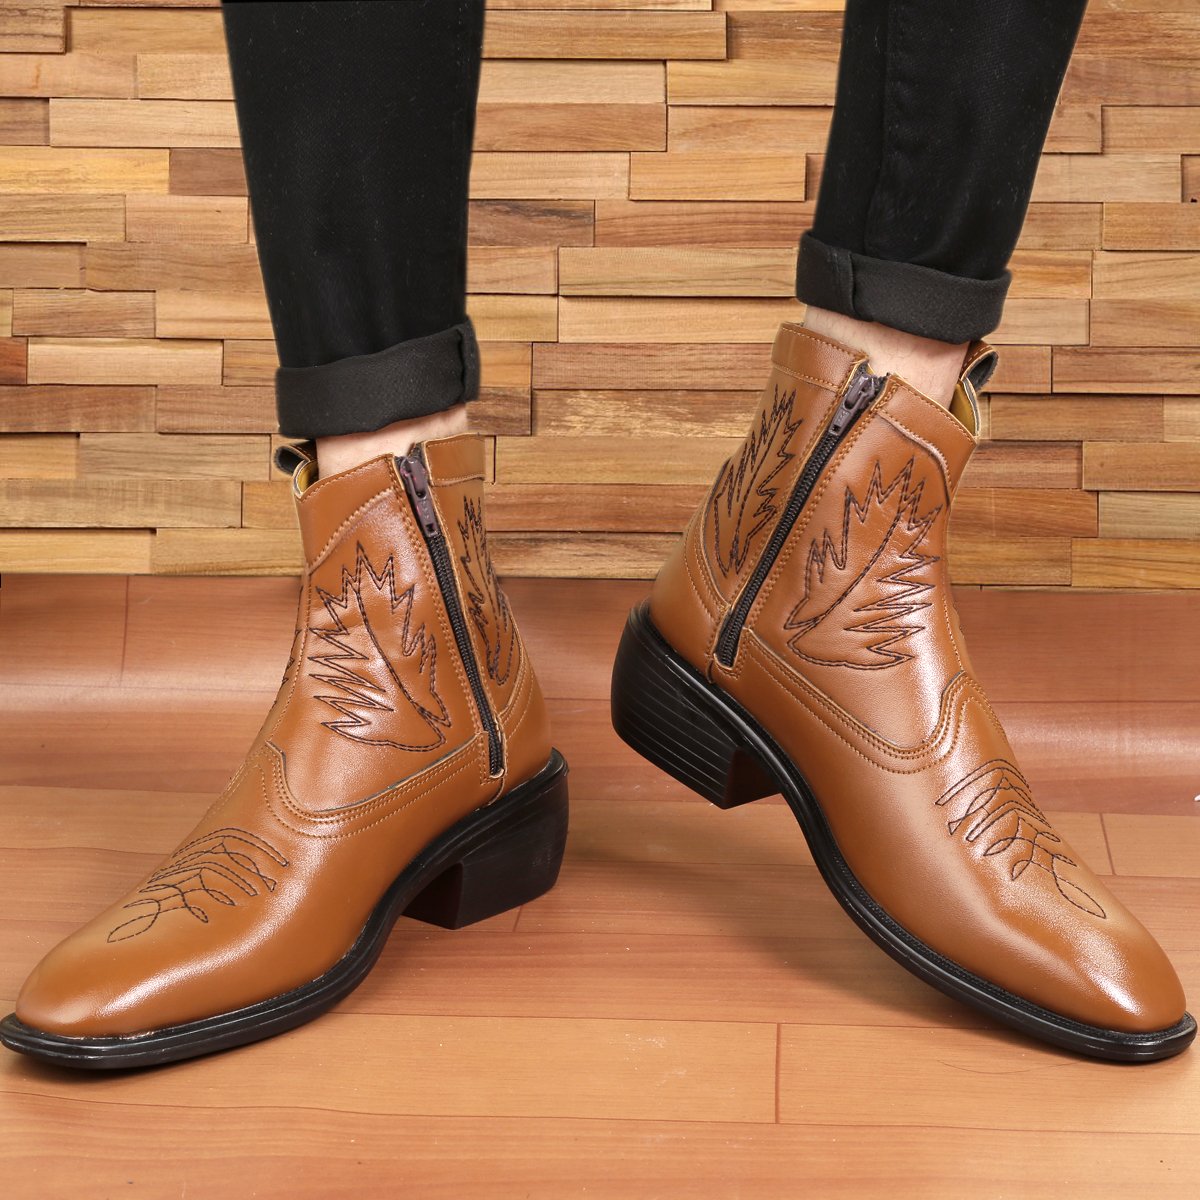 Jack Marc Men's Formal and Casual Retro Tan Boots for all seasons - JACKMARC.COM